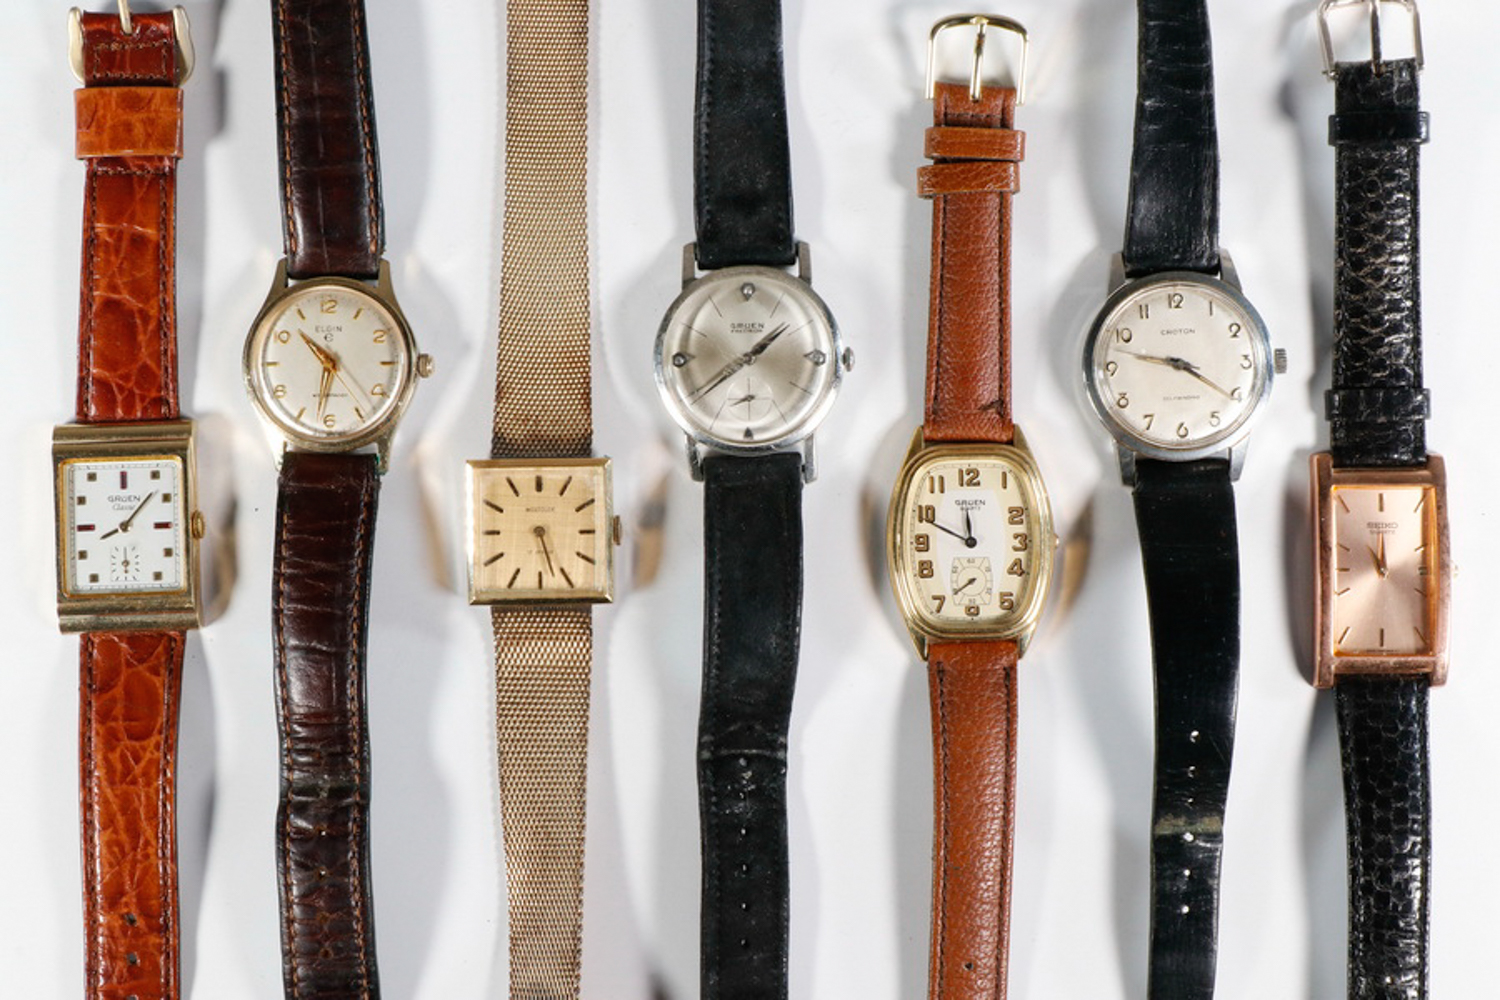 LOT OF 7 VINTAGE MENS WATCHES 33fdec